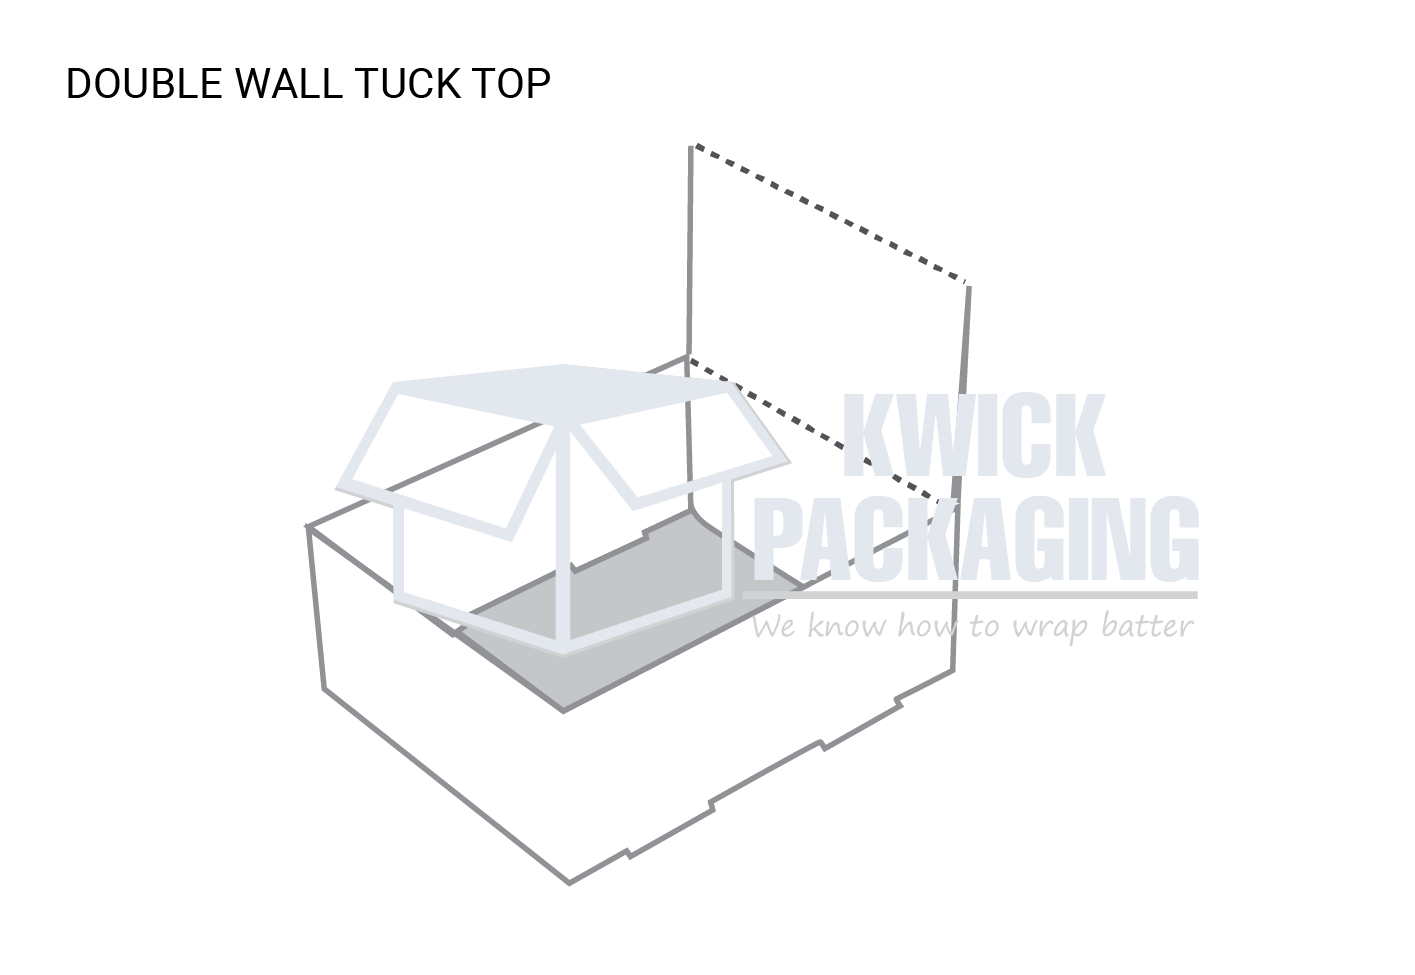 custom_Double_wall_Tuck_Top.png